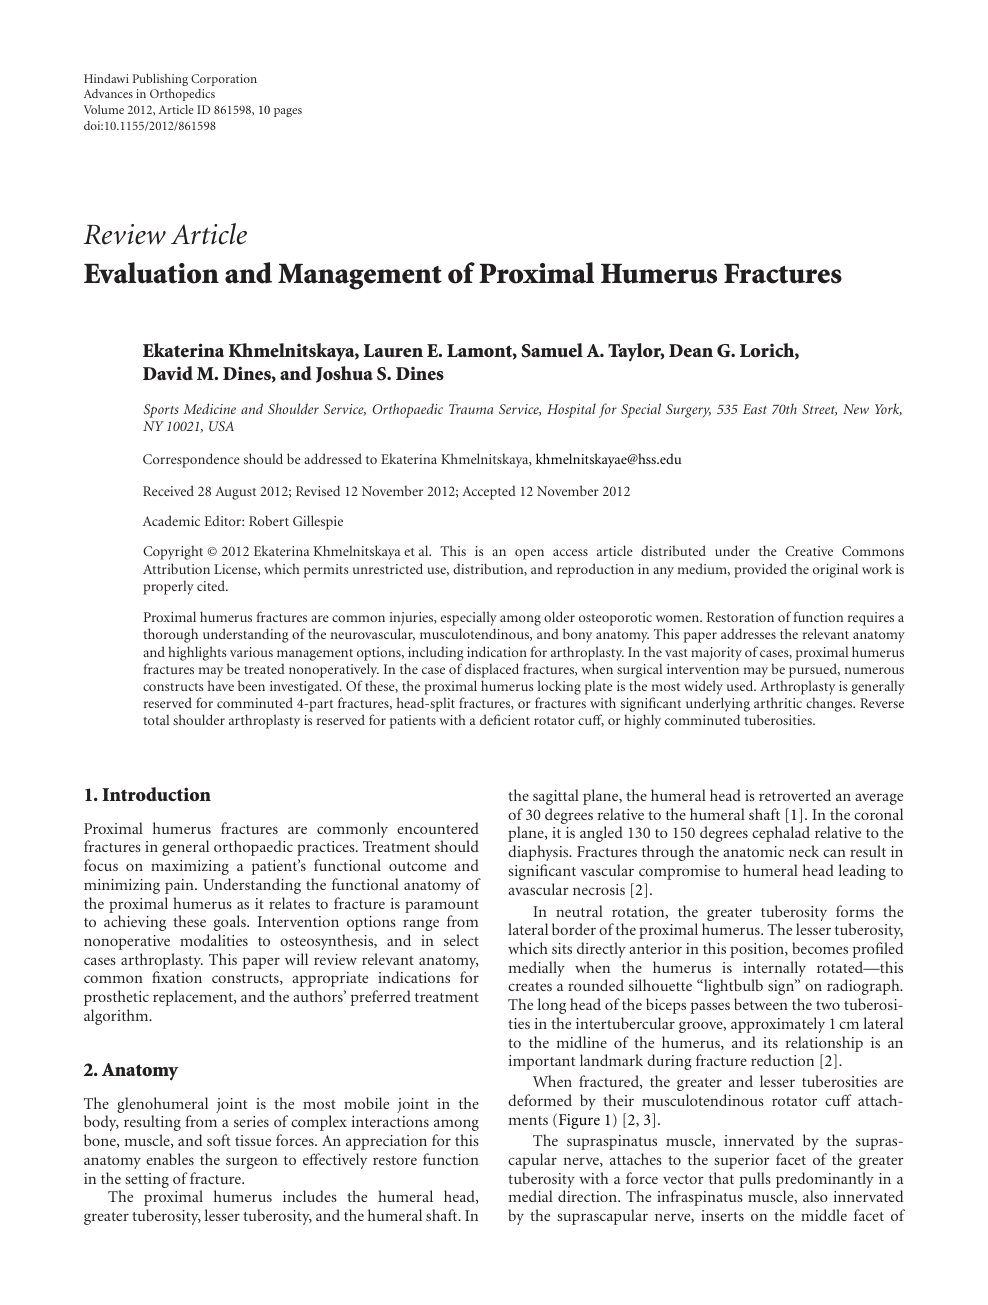 Evaluation And Management Of Proximal Humerus Fractures Topic Of Research Paper In Clinical Medicine Download Scholarly Article Pdf And Read For Free On Cyberleninka Open Science Hub